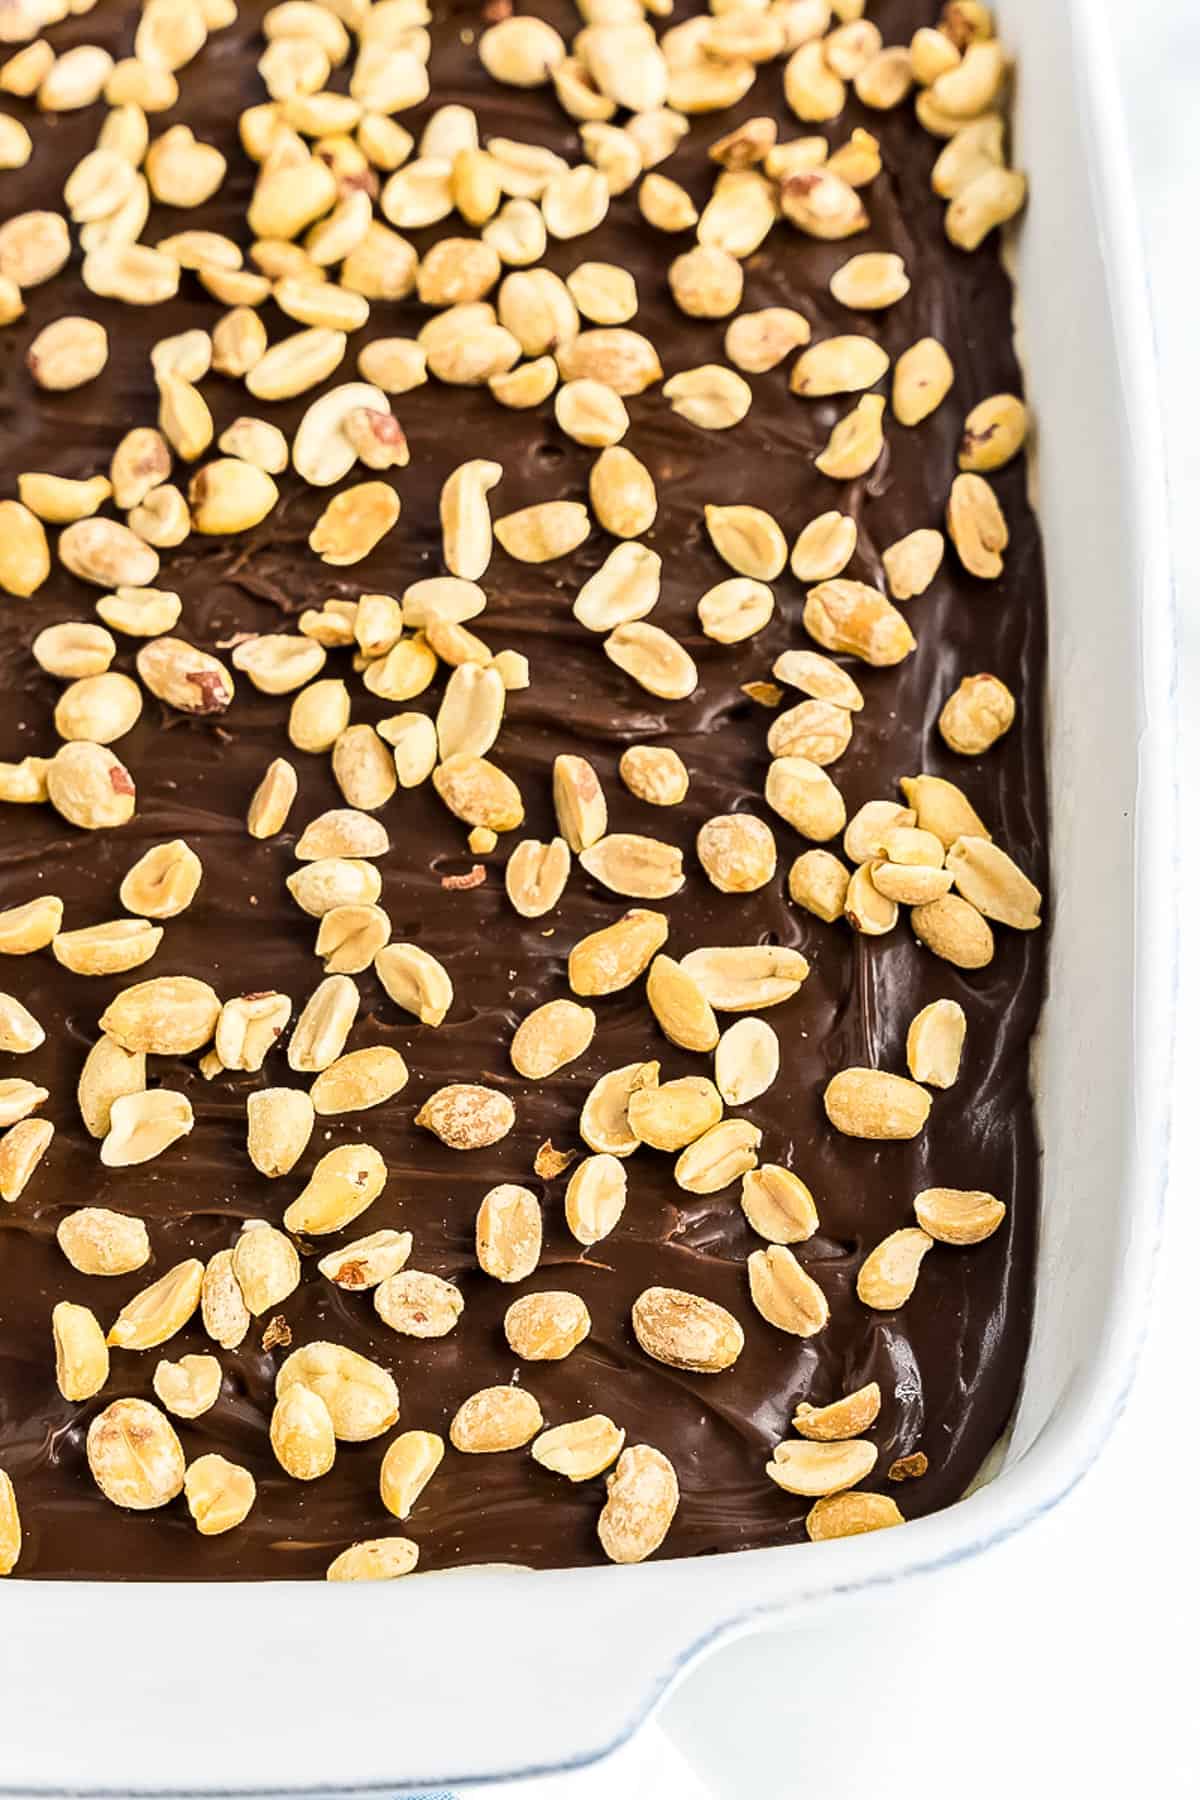 White baking dish with homemade fudge sauce layer topped with peanuts